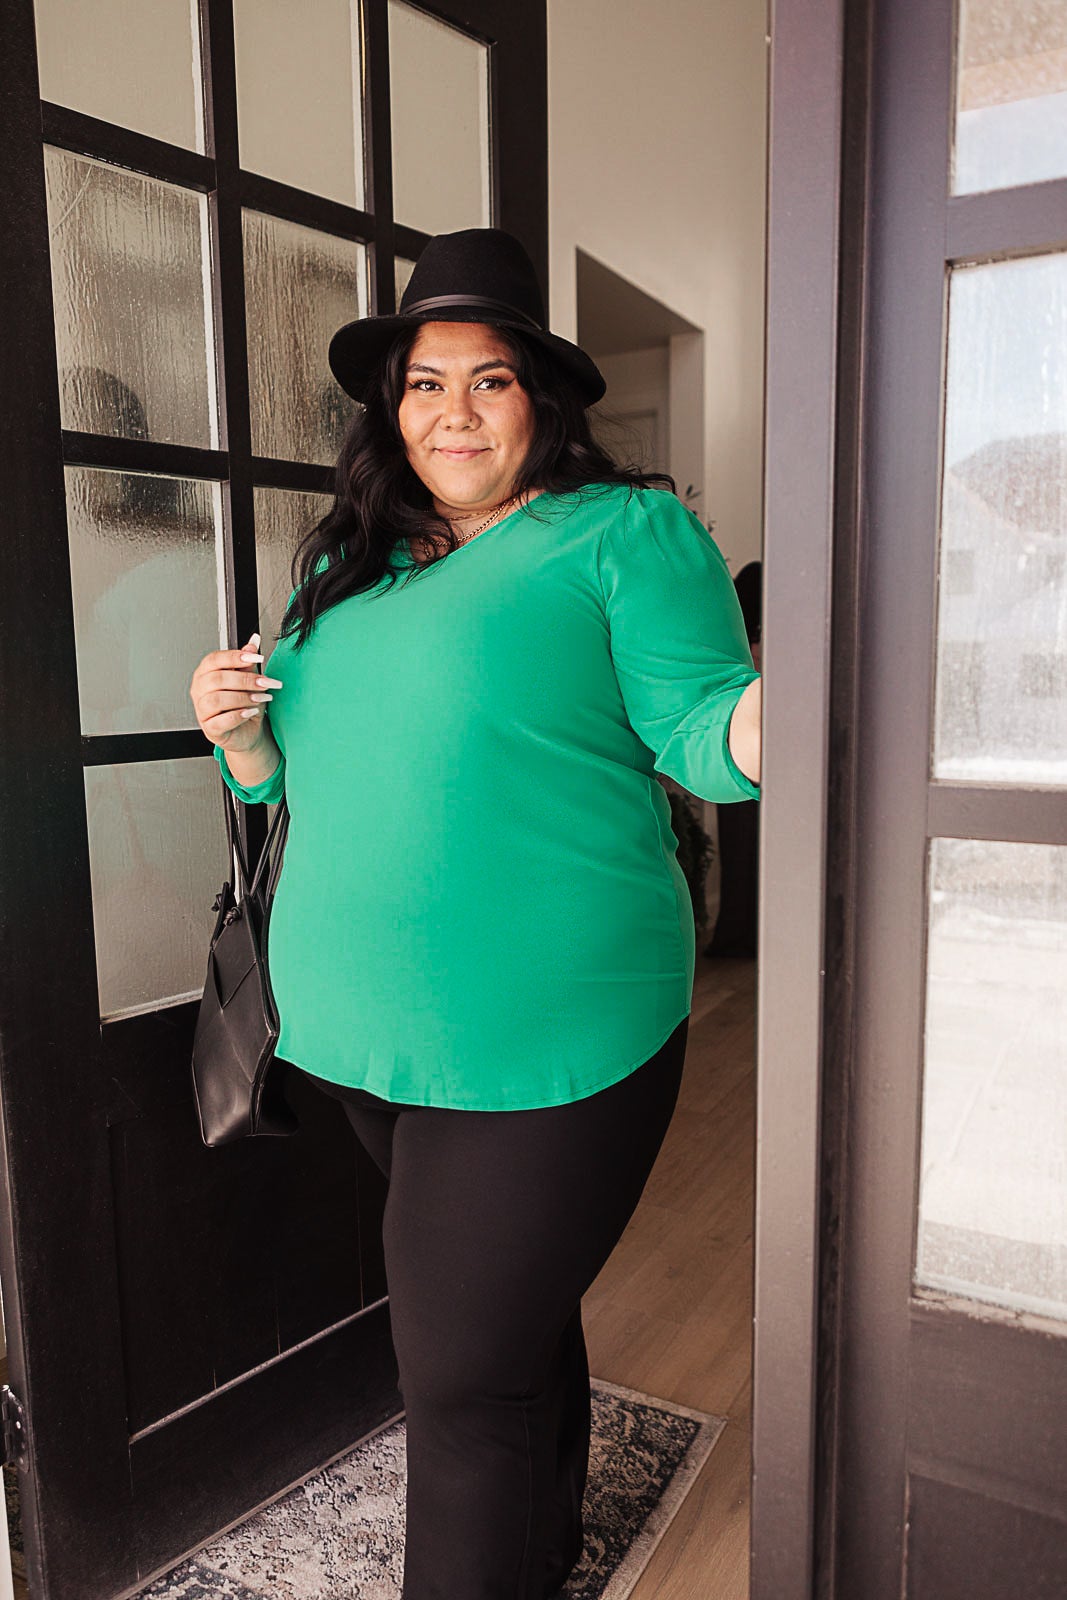 Lucky Chic Top in Kelly Green